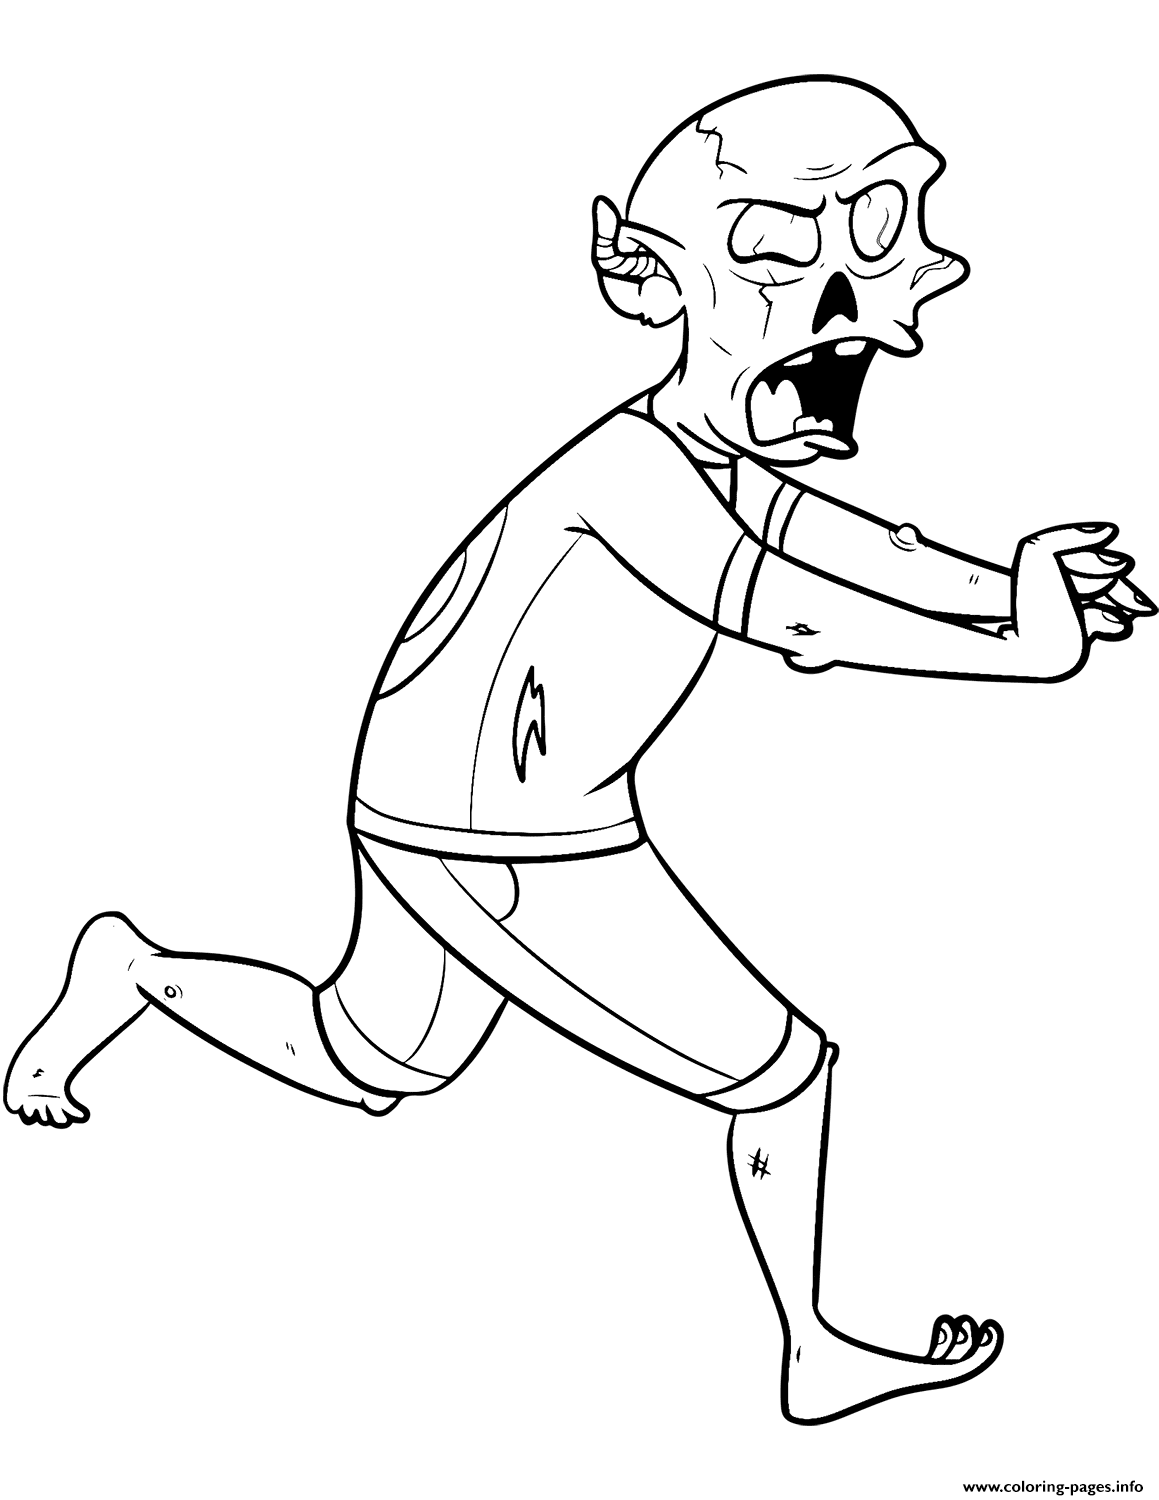 Running Zombie coloring